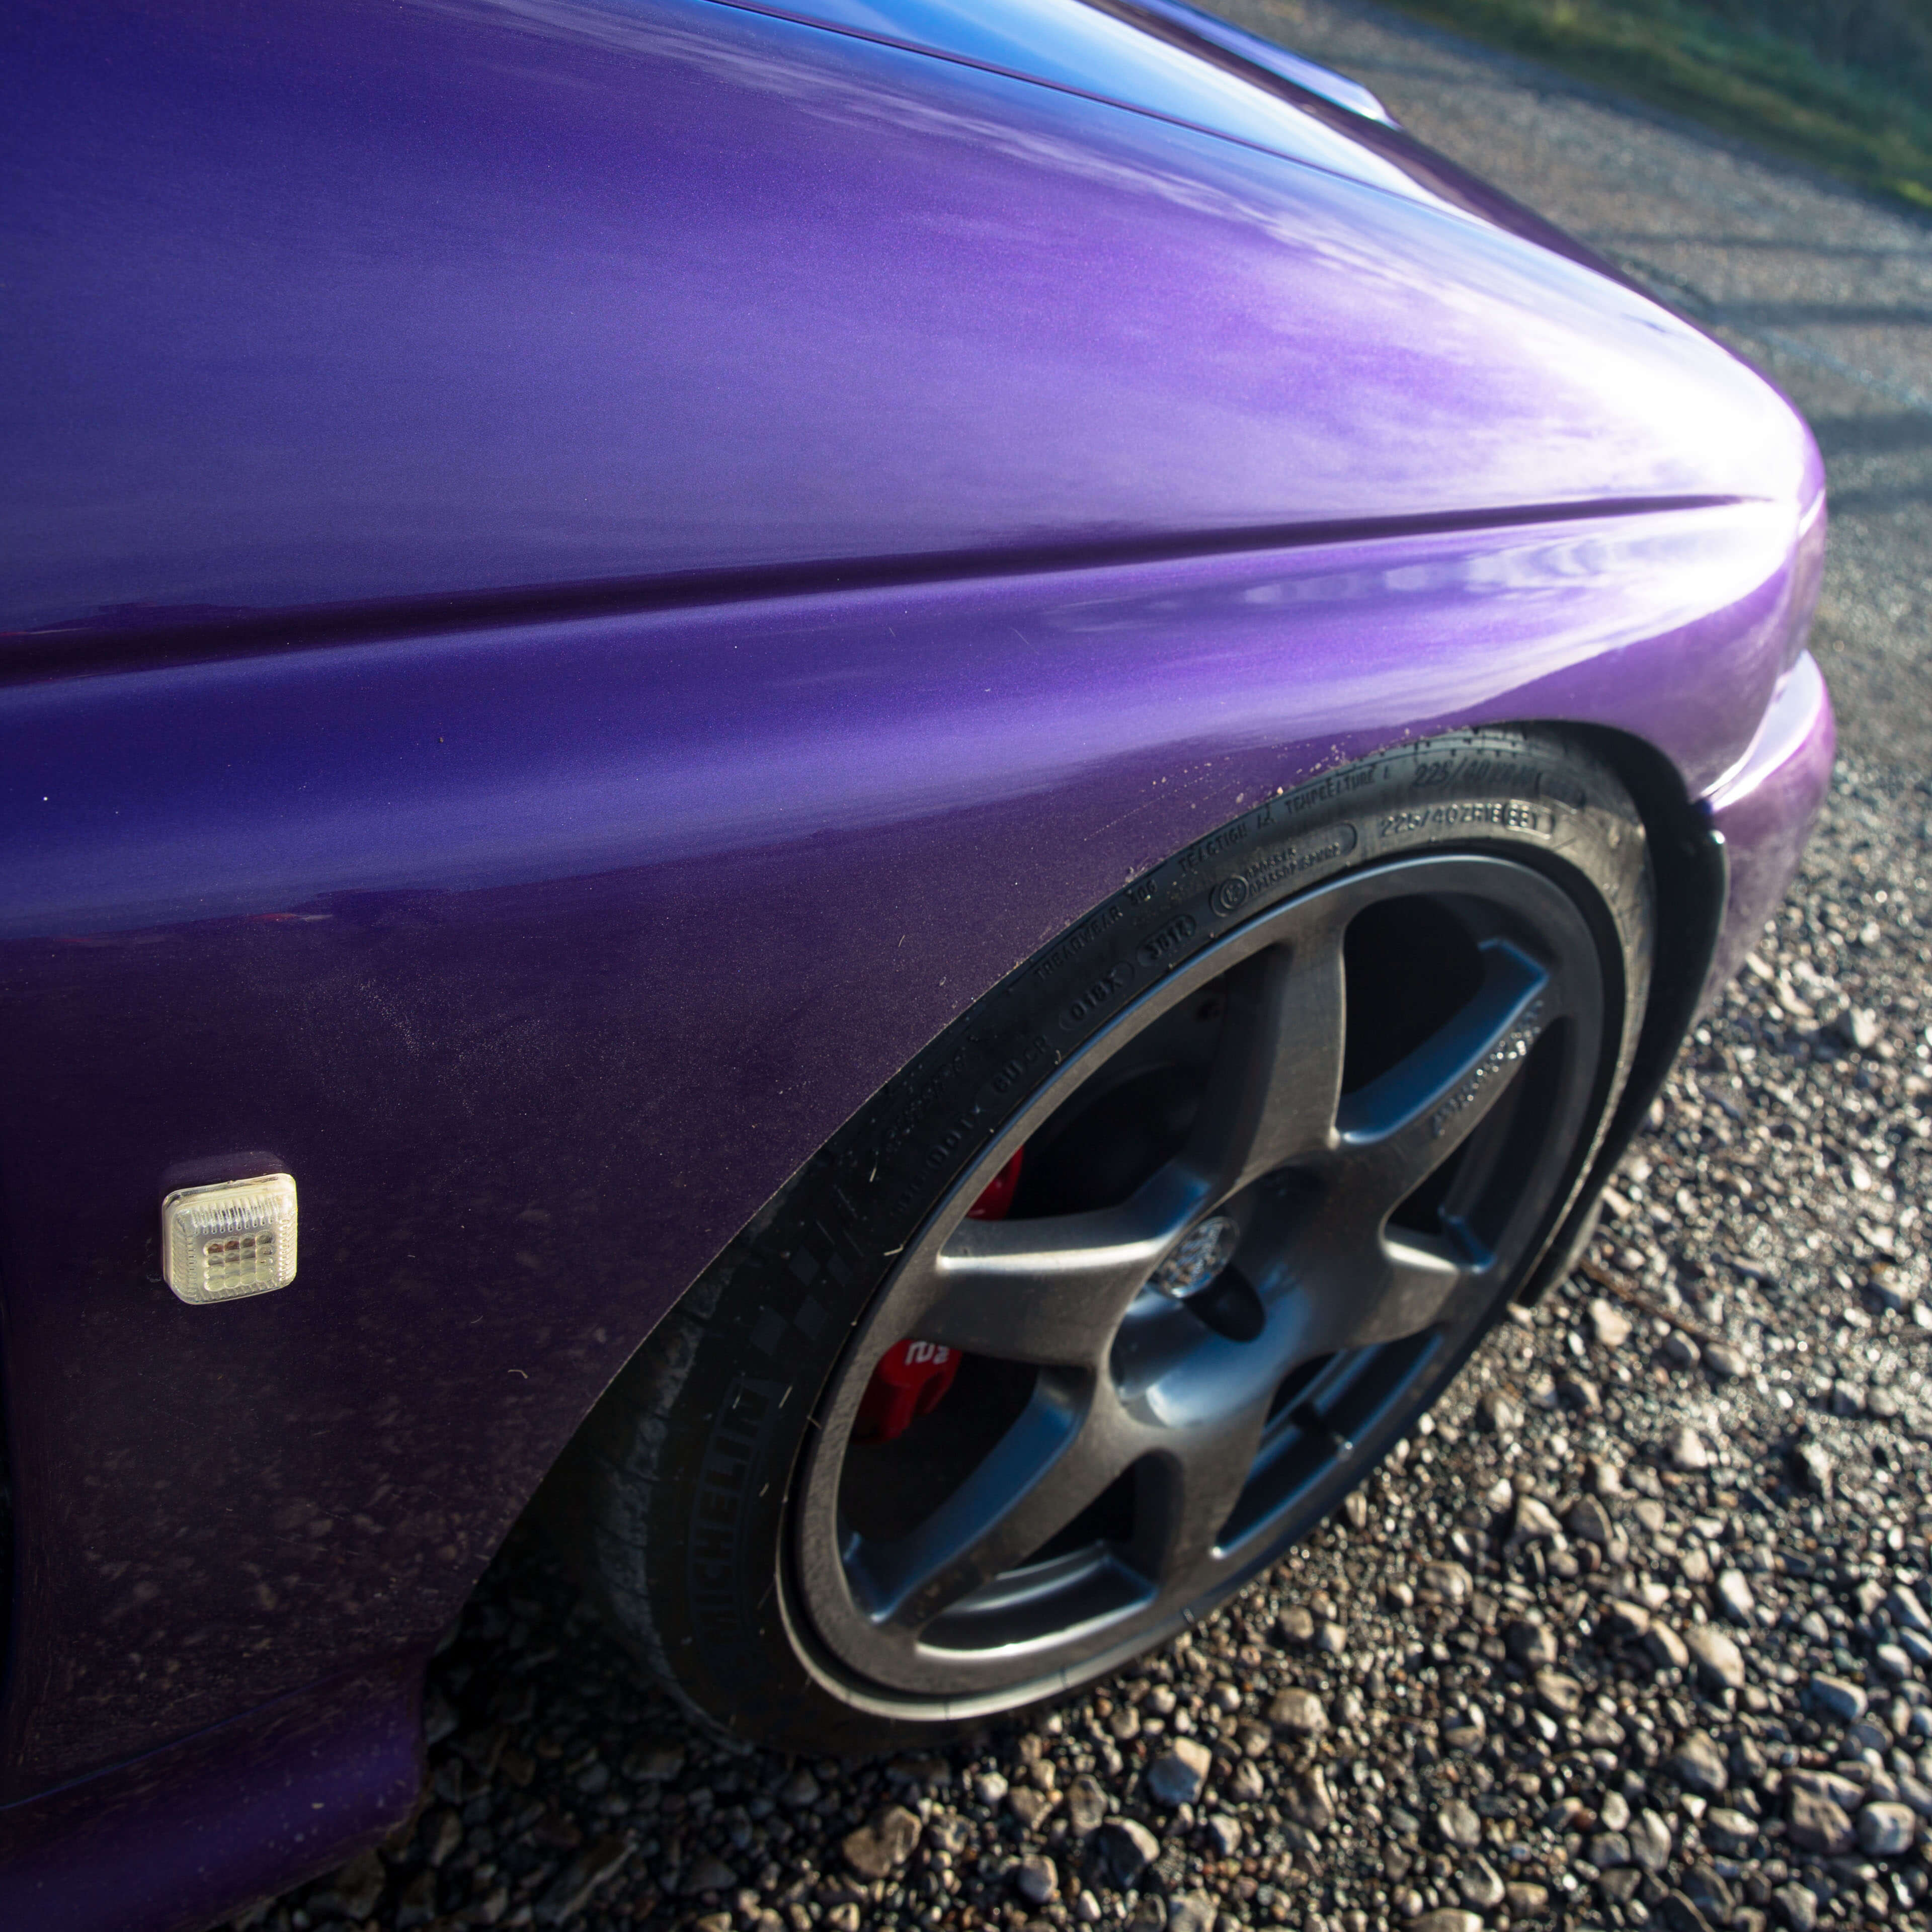 Purple Ford Escort front side view with wheel in shot